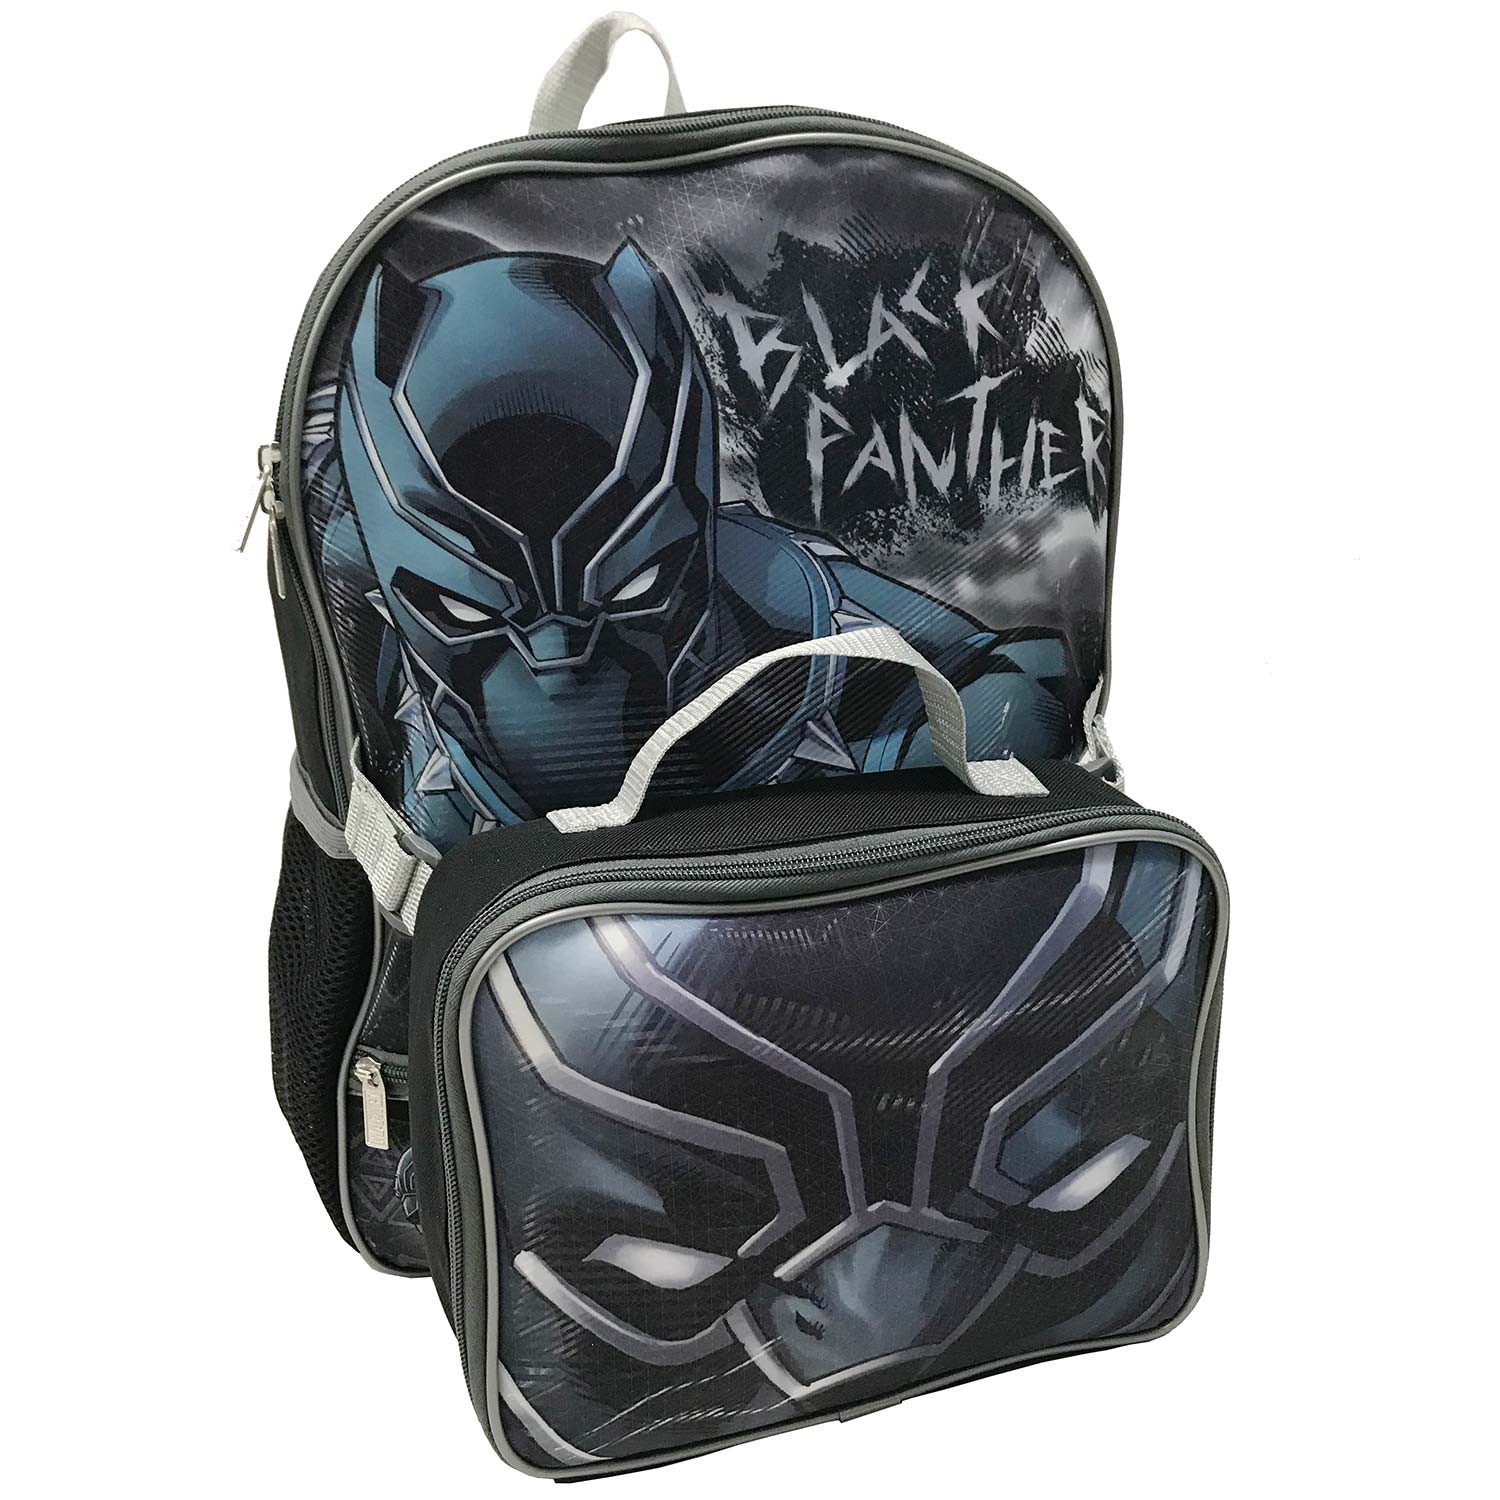 Marvel Black Panther Dual Compartment Lunch Bag Tote | eBay